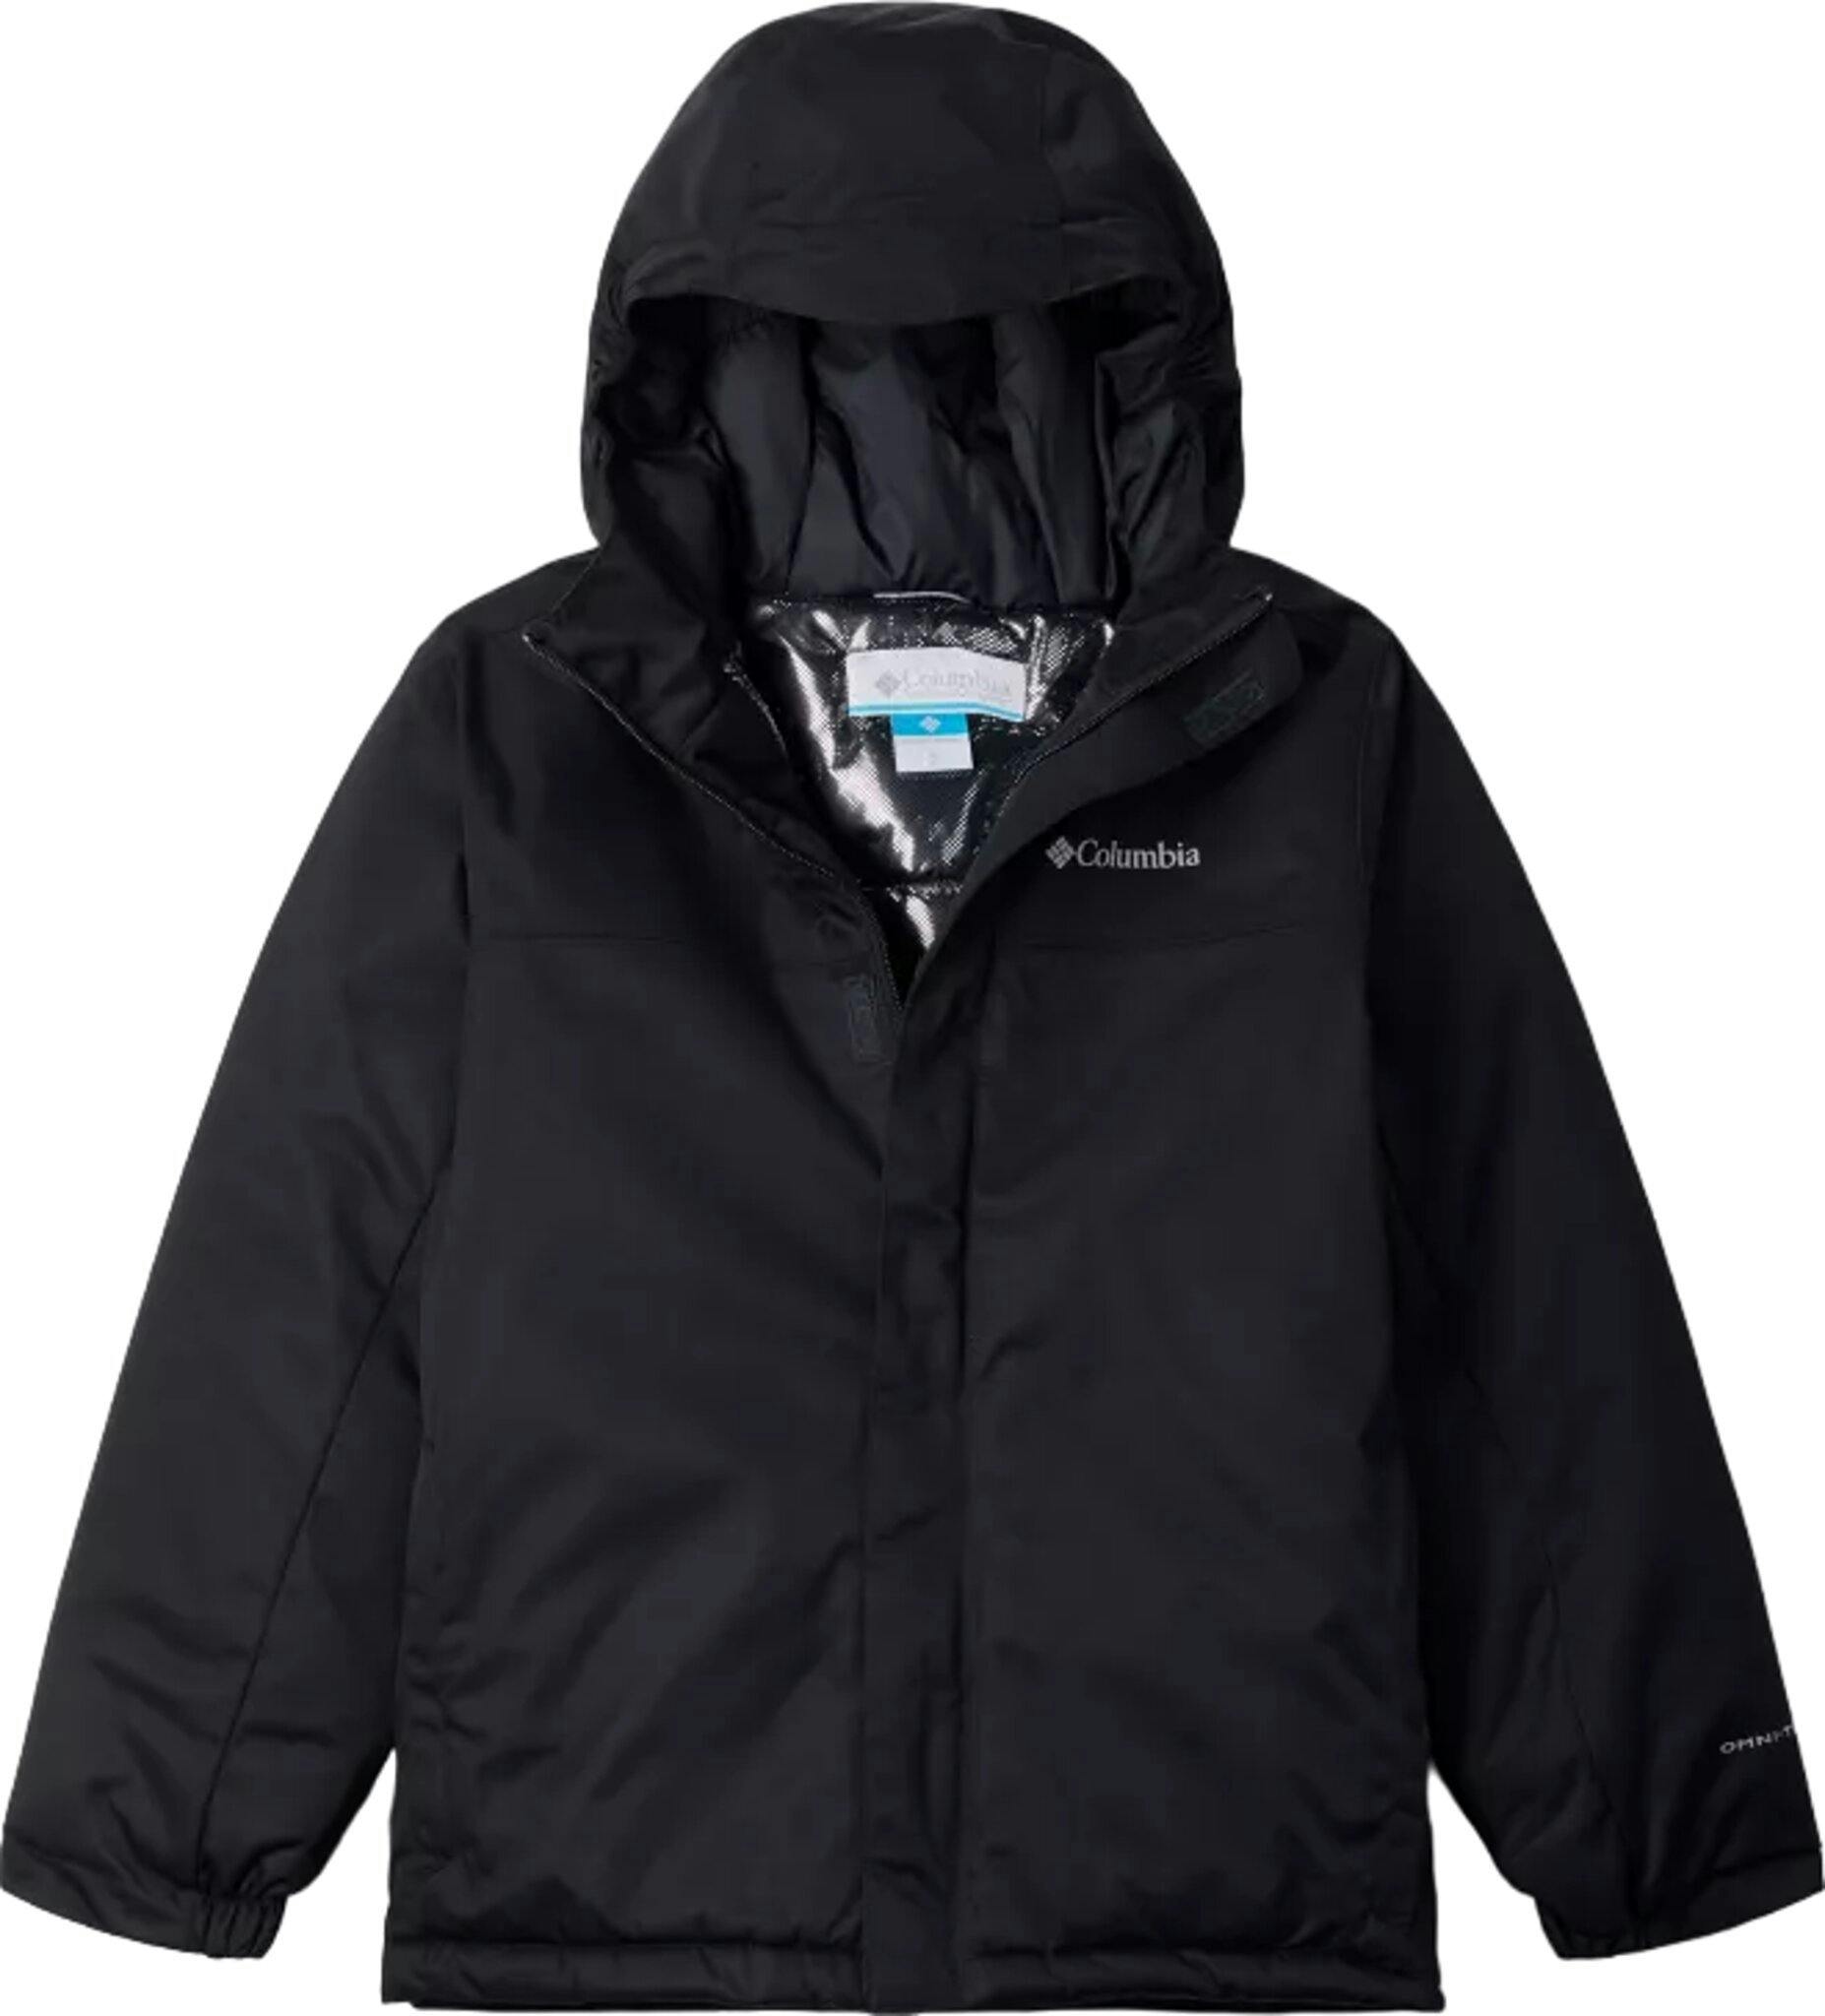 Product image for Hikebound Insulated Jacket - Boys